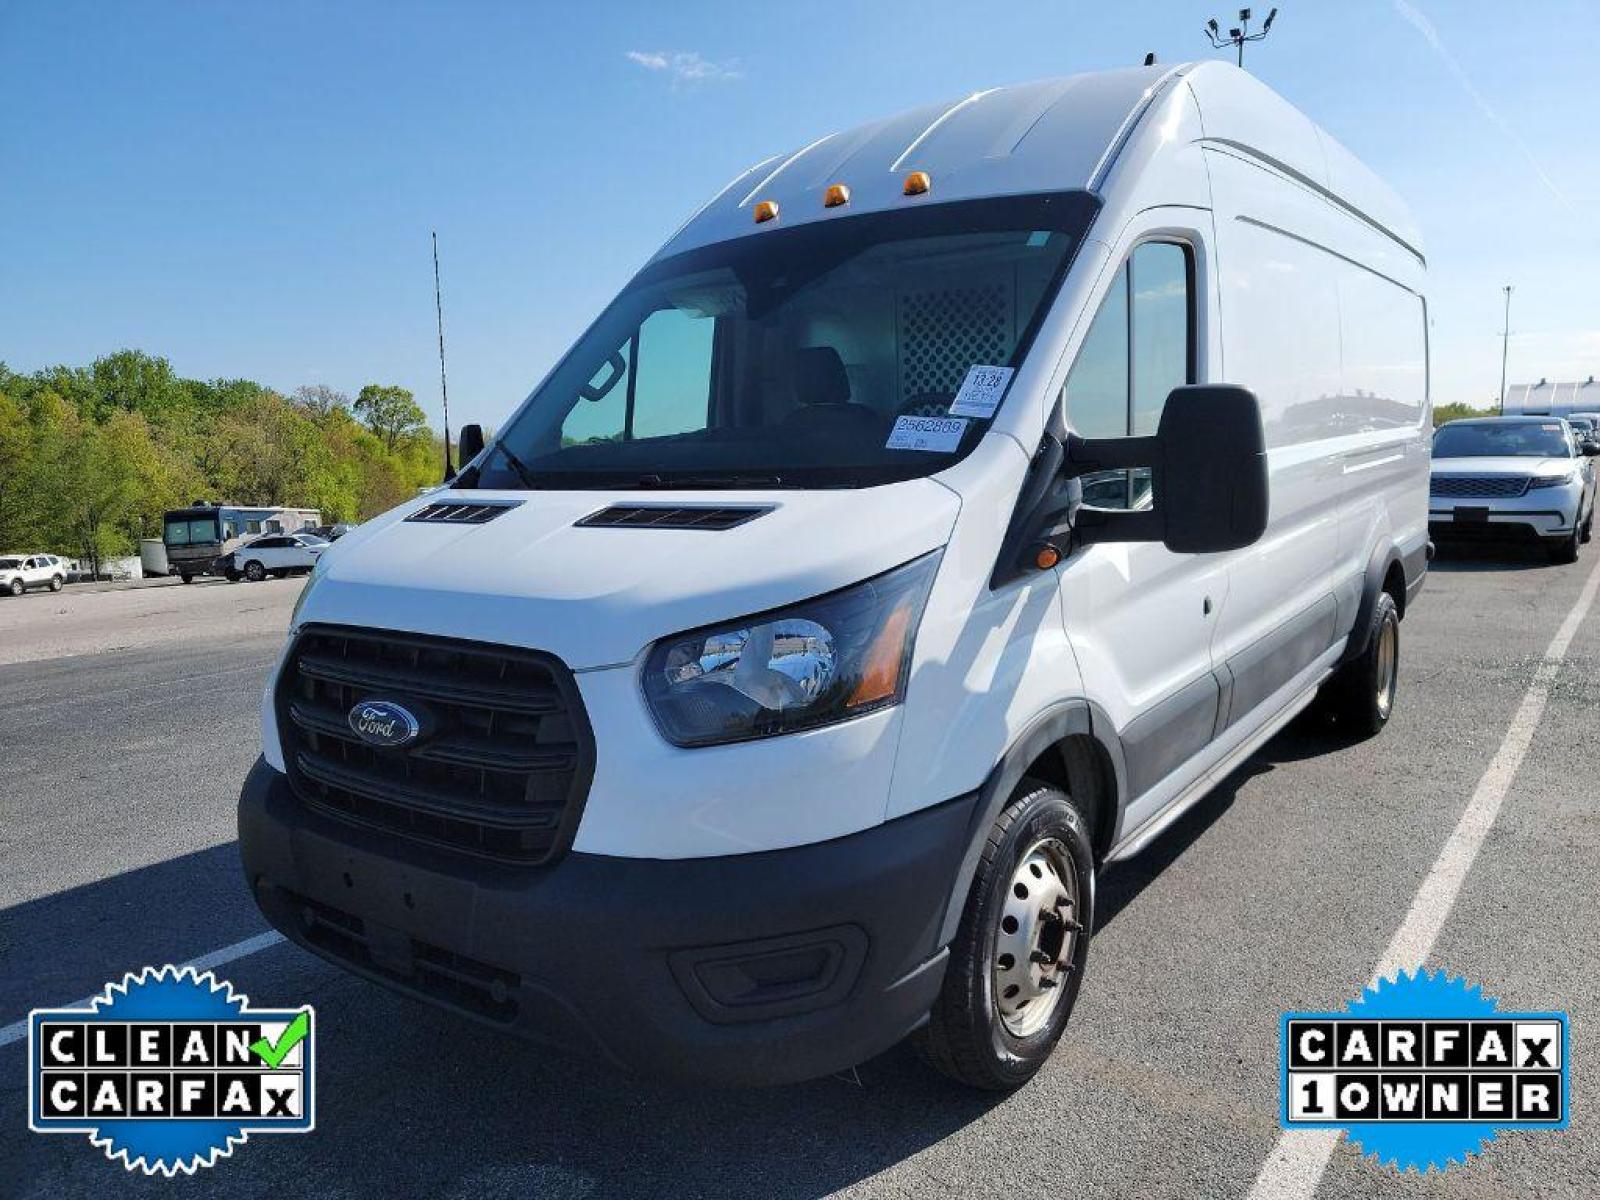 2020 Oxford White /Dark Palazzo Ford Transit Van Base w/10,360 lb. GVWR (1FTRS4XG8LK) with an V6, 3.5L engine, 10-speed automatic transmission, located at 3147 E Independence Blvd, Charlotte, NC, 28205, 35.200268, -80.773651 - <b>Equipment</b><br>See what's behind you with the back up camera on this unit. Good News! This certified CARFAX 1-owner vehicle has only had one owner before you. This unit features a hands-free Bluetooth phone system. It has a clean CARFAX vehicle history report. The rear parking assist technology - Photo #2